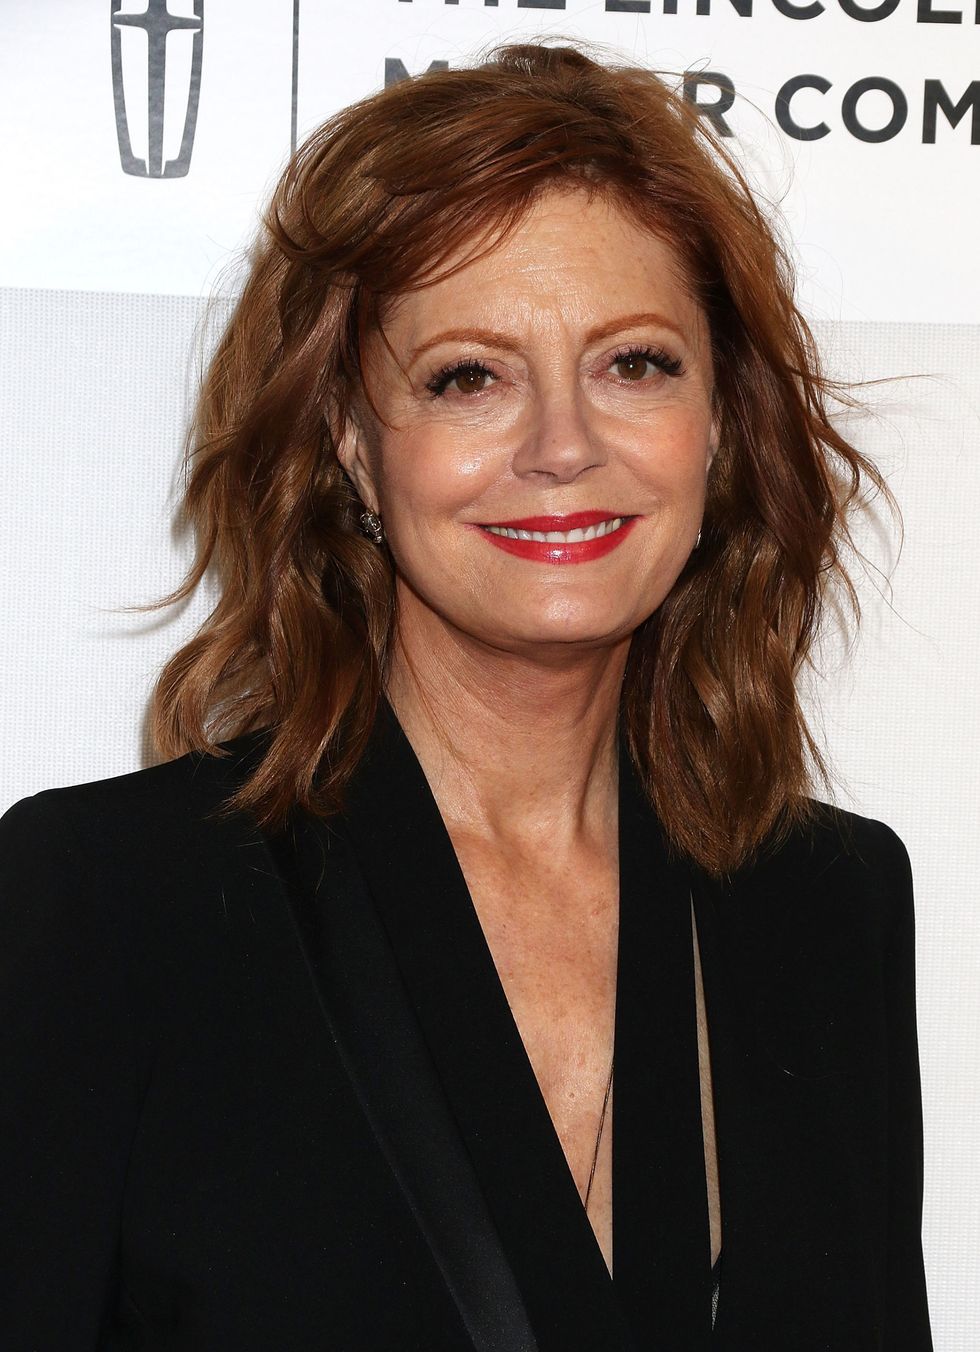 <p>Sarandon opened up to <em>The Telegraph</em>  <a href="http://www.telegraph.co.uk/culture/8023313/Im-Still-a-Hippie-Chick-Susan-Sarandon-interview.html">in 2011</a>, two years after her rough split from longtime partner Tim Robbins: "I've always liked the idea of choosing to be with somebody. I thought that if you didn't get married you wouldn't take each other for granted as easily. I don't know if after twenty-something years that was still true," she said.  </p>